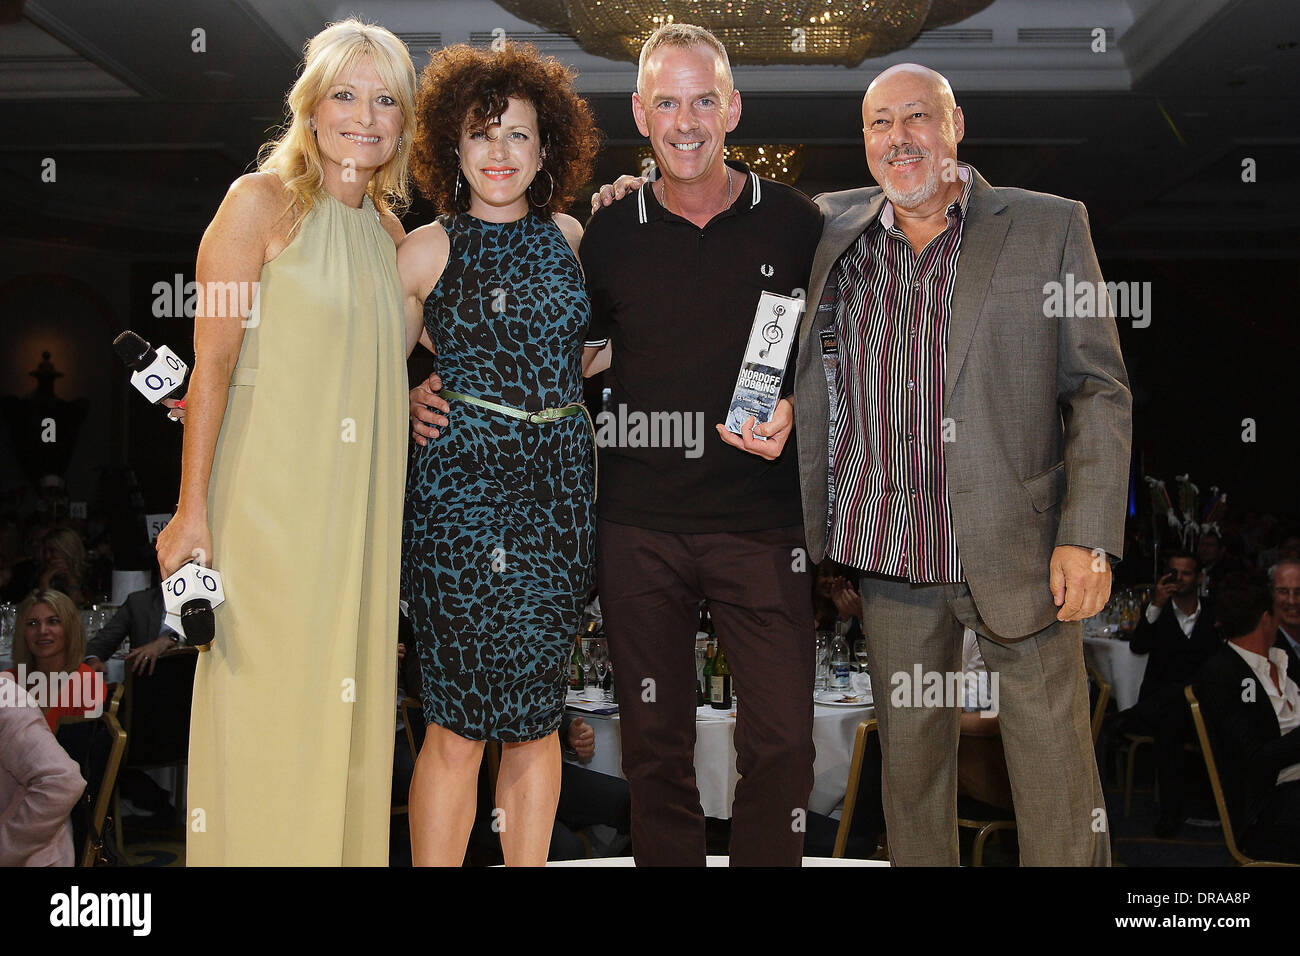 Norman Cook aka Fat Boy Slim receives the Investec Icon Award,  The Nordoff Robbins O2 Silver Clef Awards held at the Hilton Park Lane. London, England - 29.06.12 Stock Photo